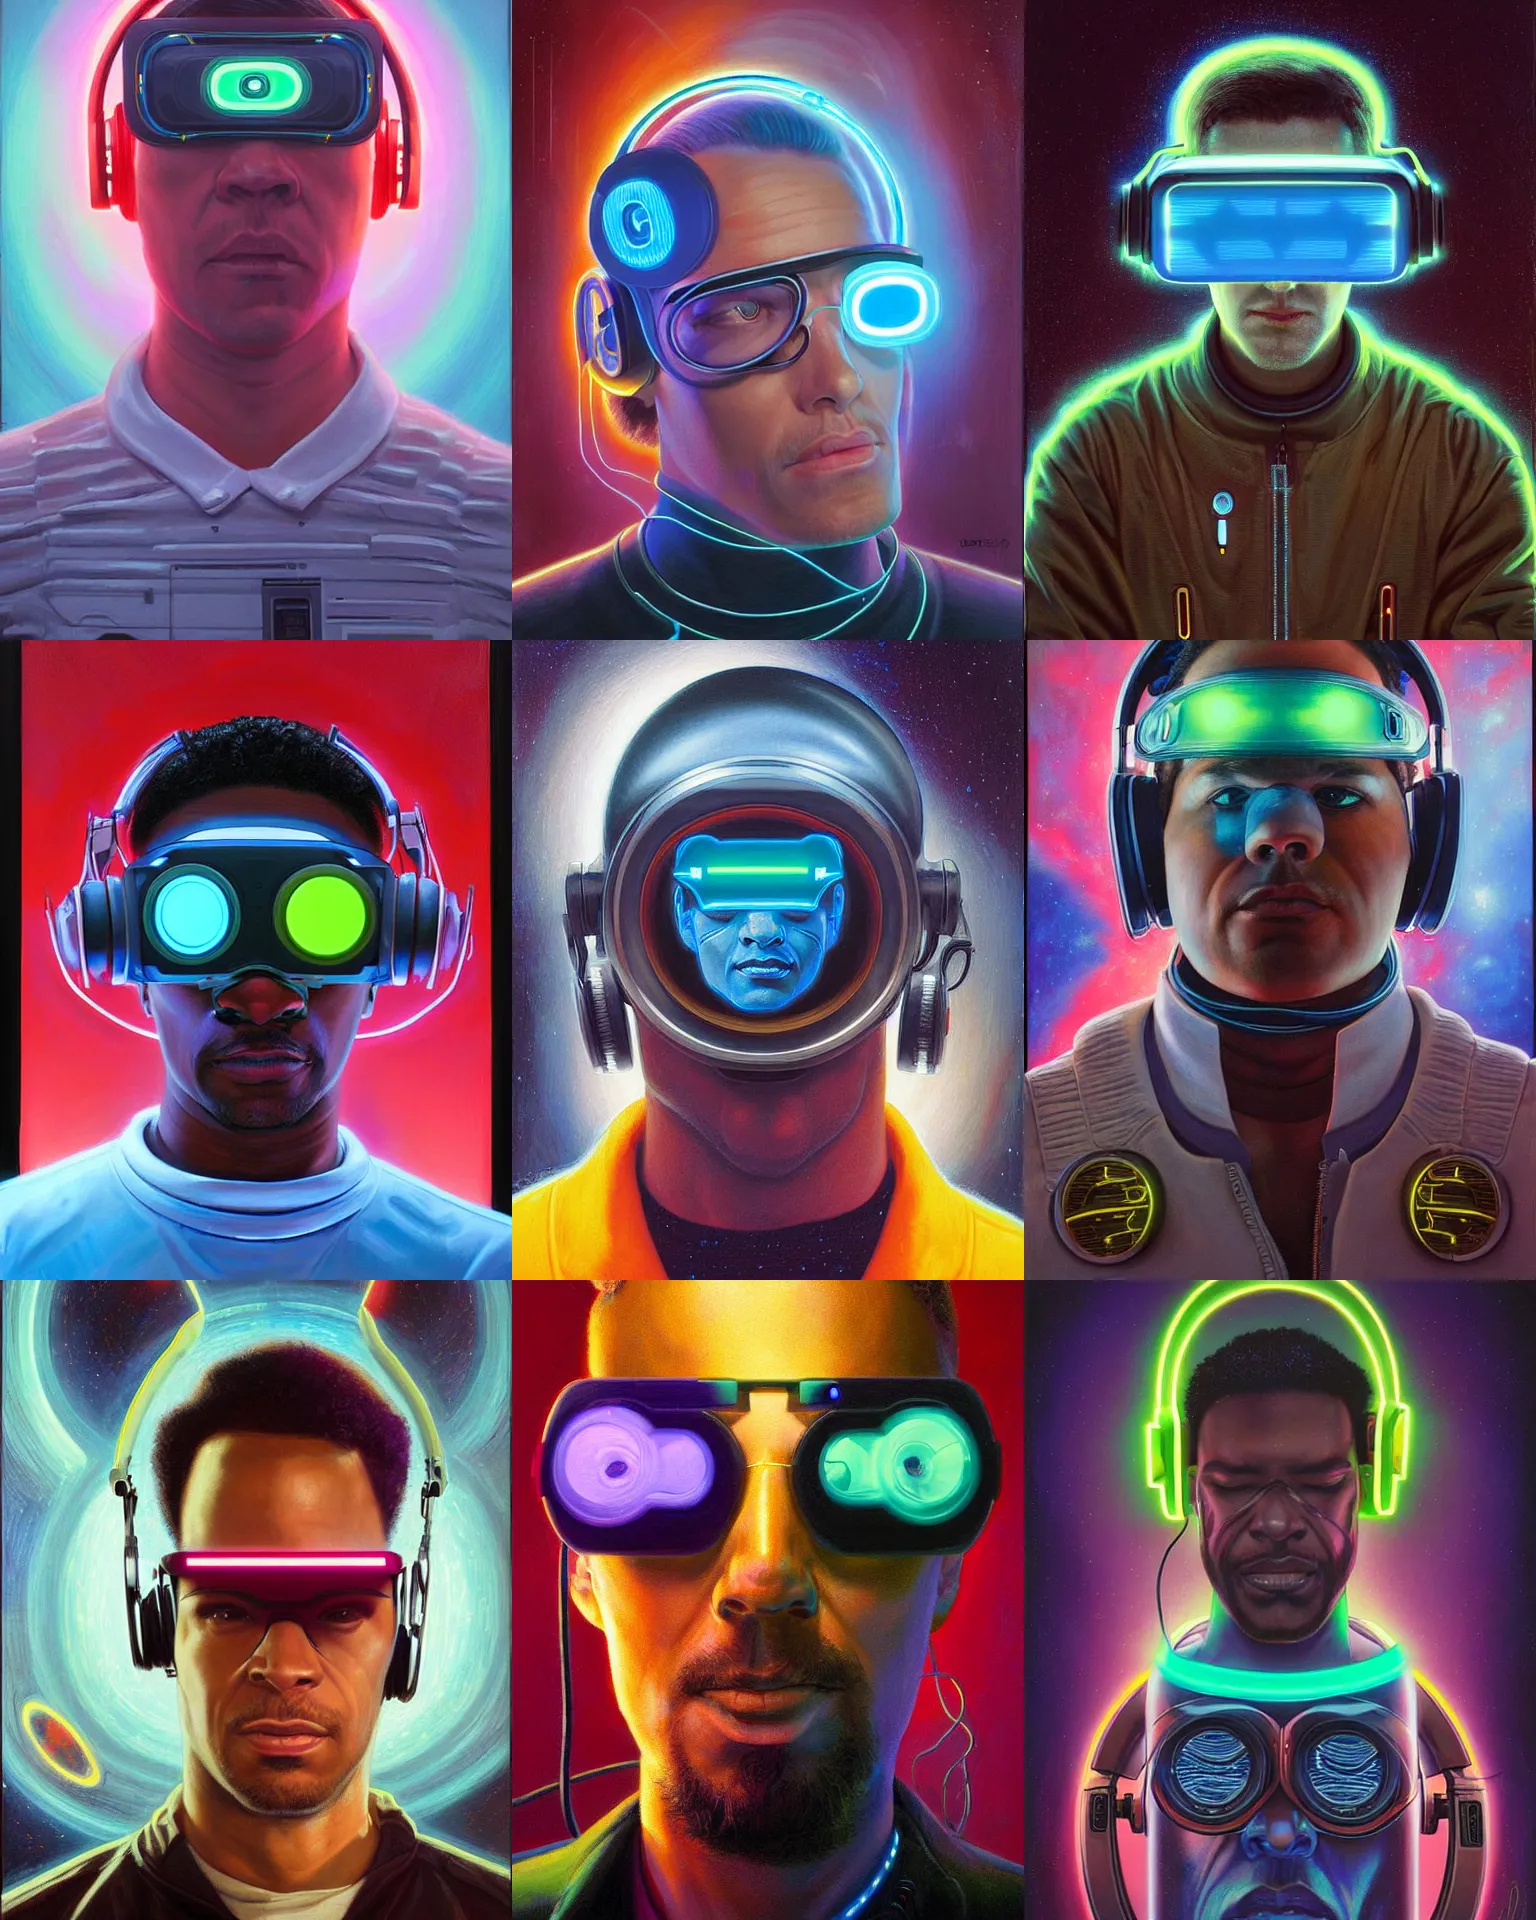 Prompt: three quarters view portrait neon cyberpunk programmer with glowing geordi cyclops visor over eyes and sleek headphones headshot desaturated painting by donato giancola, dean cornwall, rhads, tom whalen, alex grey astronaut fashion photography